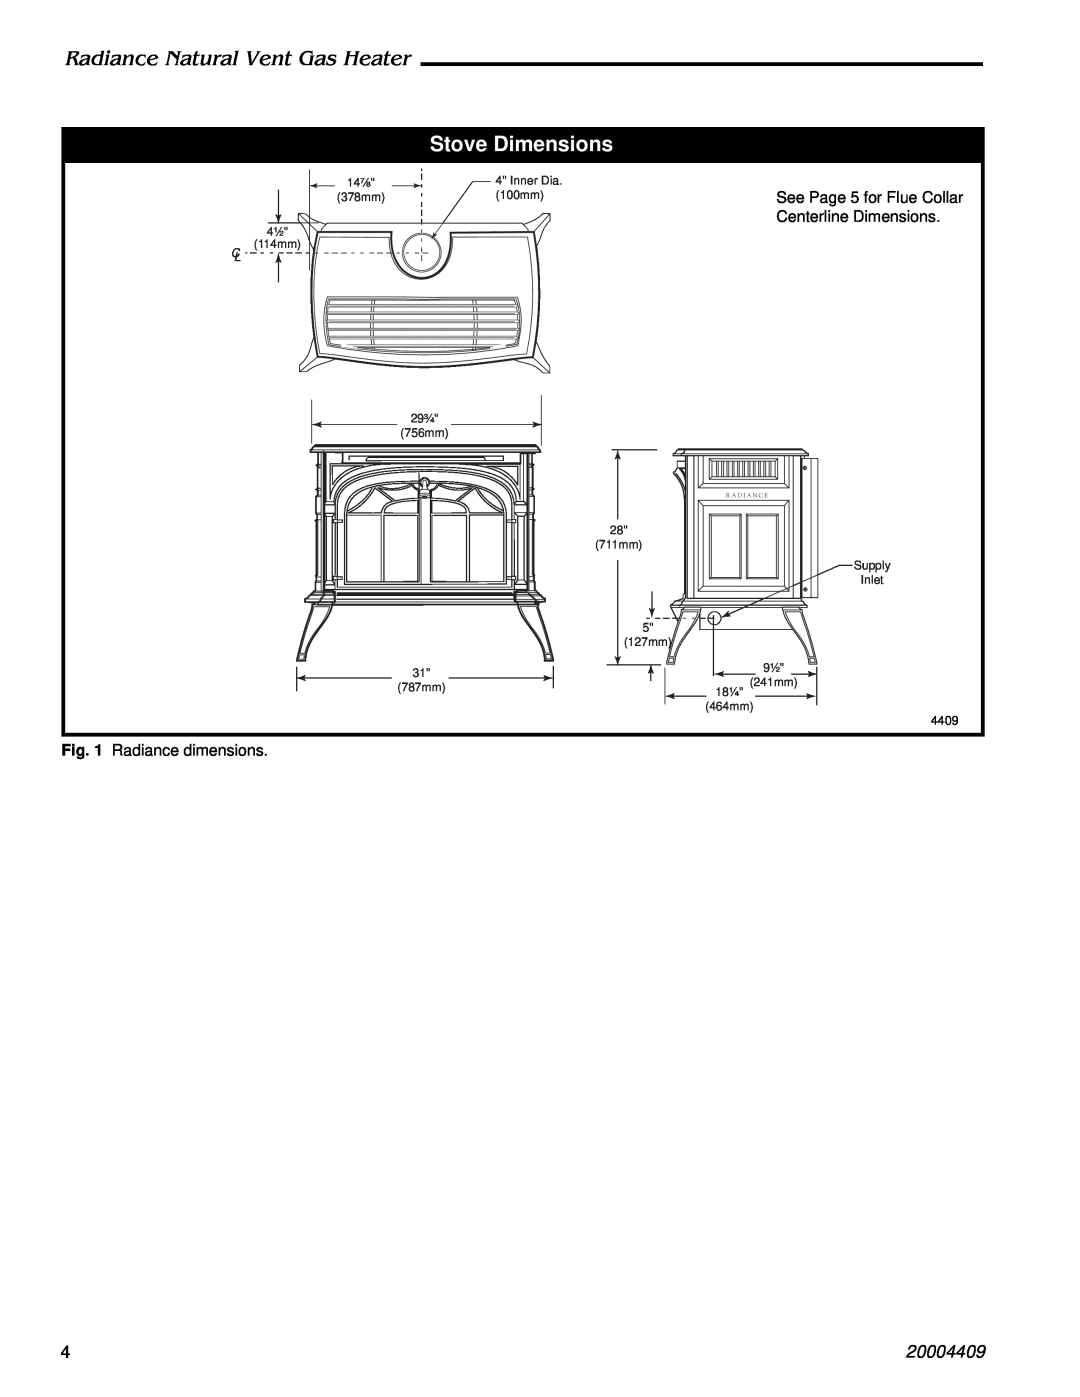 Vermont Casting 3340 Stove Dimensions, Radiance Natural Vent Gas Heater, 20004409, Centerline Dimensions, 14⁷⁄₈, Inner Dia 